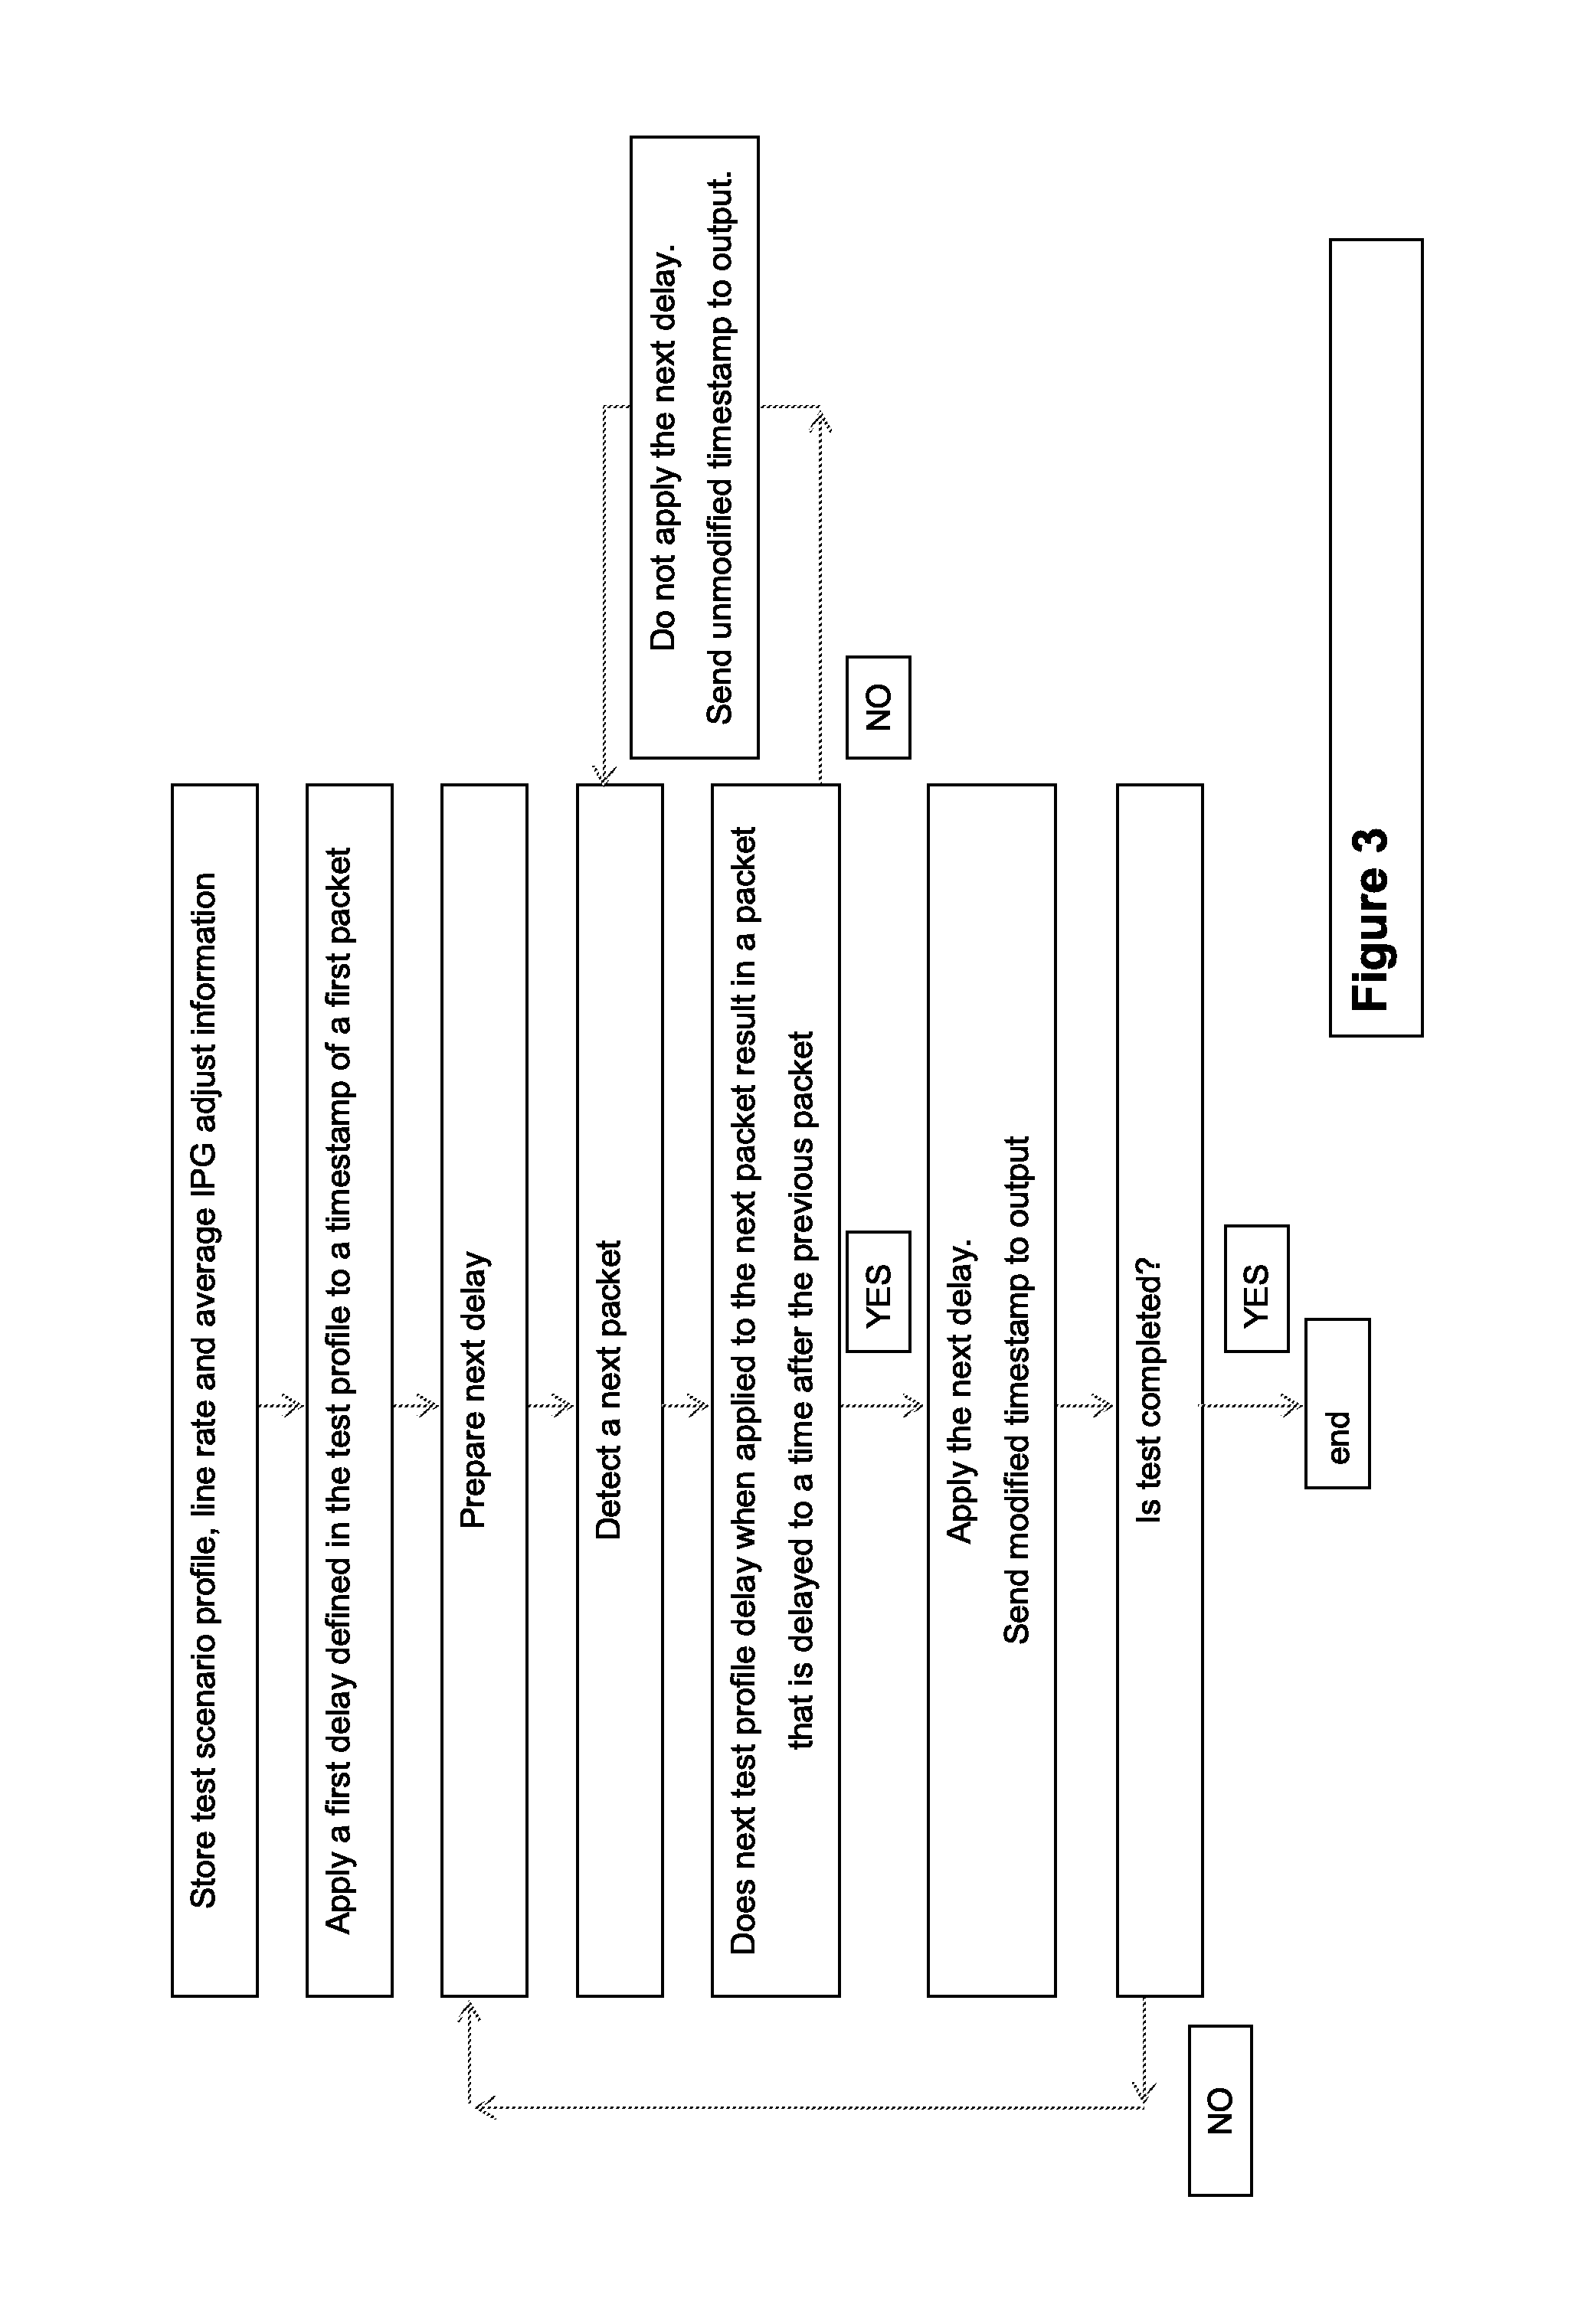 Packet Delay Variation in a Packet Switched Network